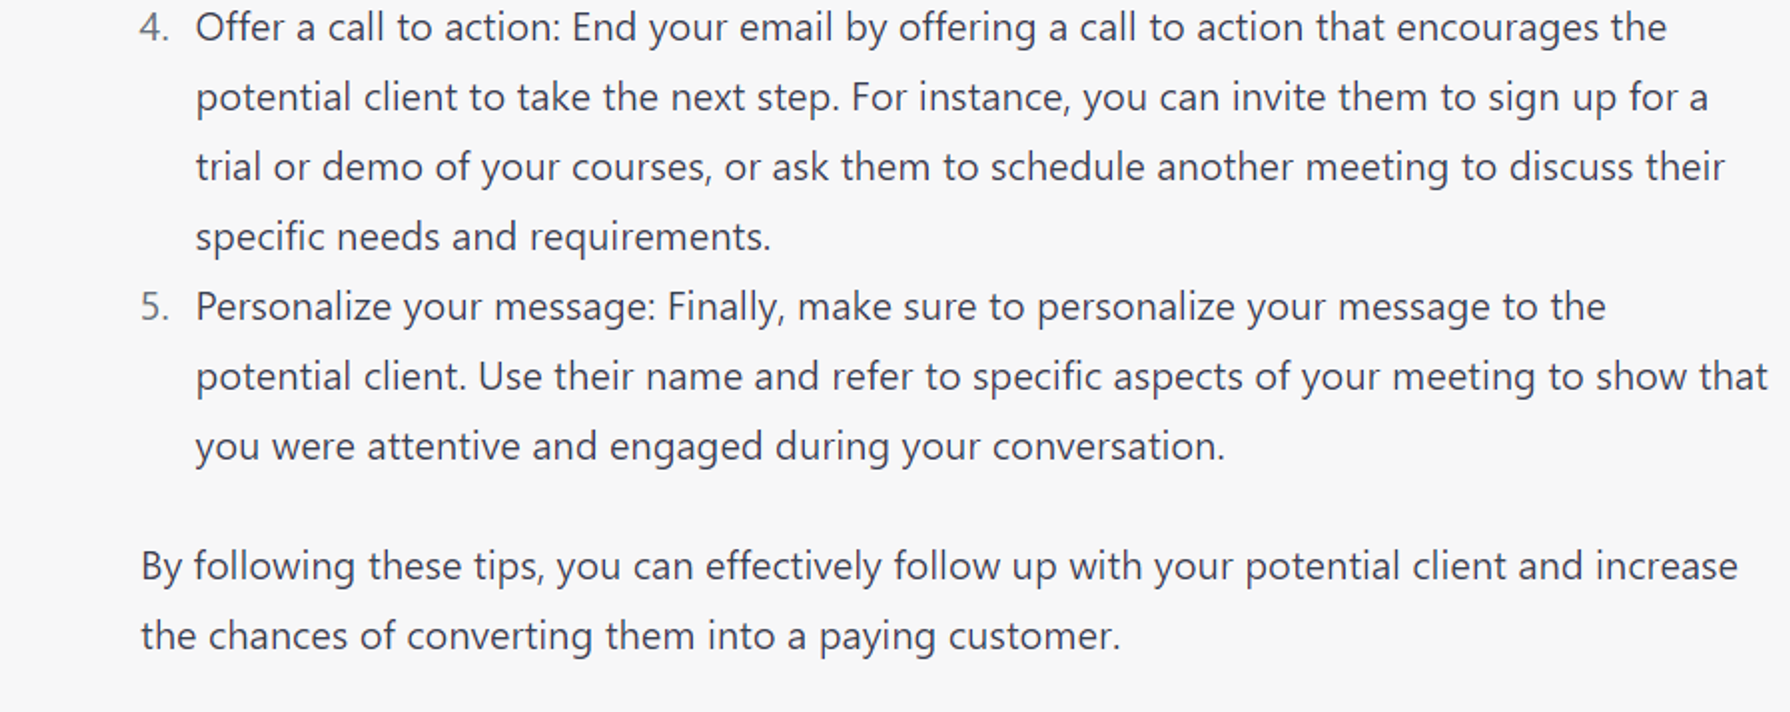  7 Advanced ChatGPT Prompts: Follow up with potential client